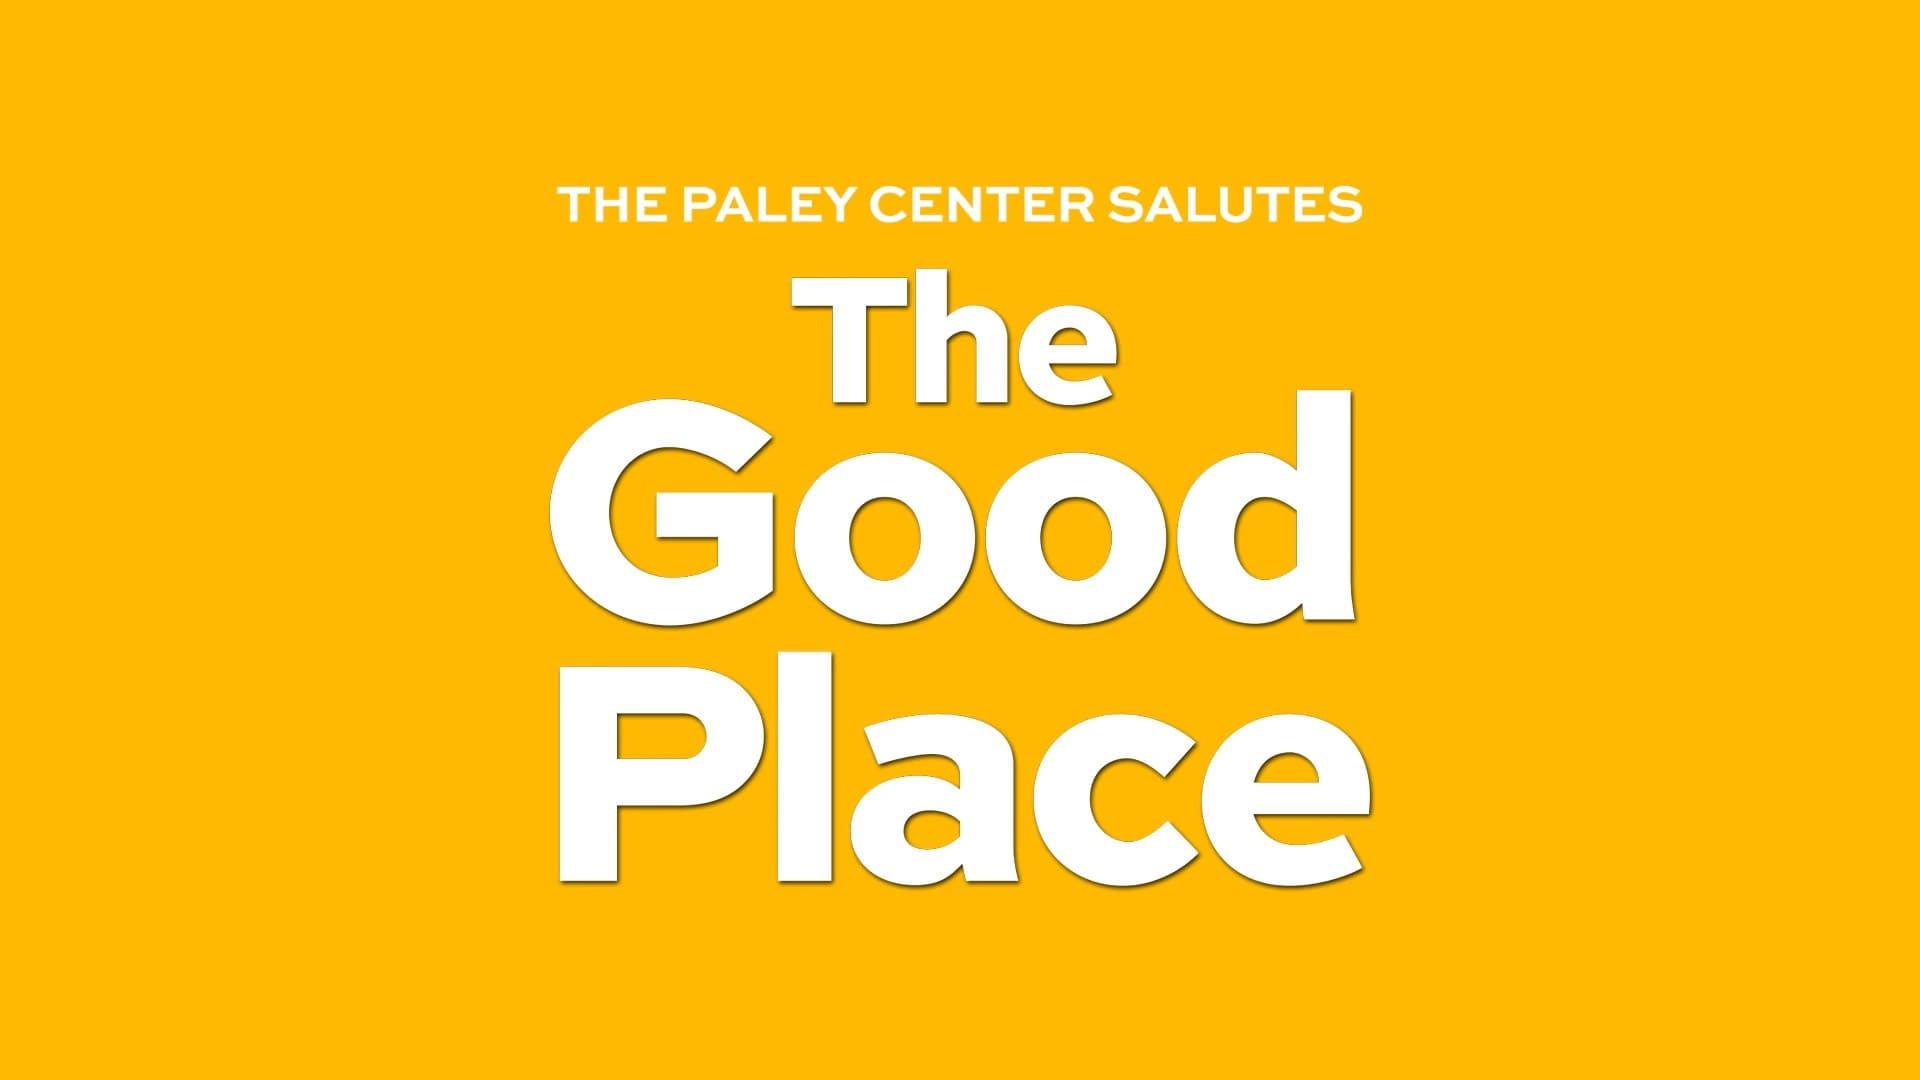 The Paley Center Salutes The Good Place backdrop